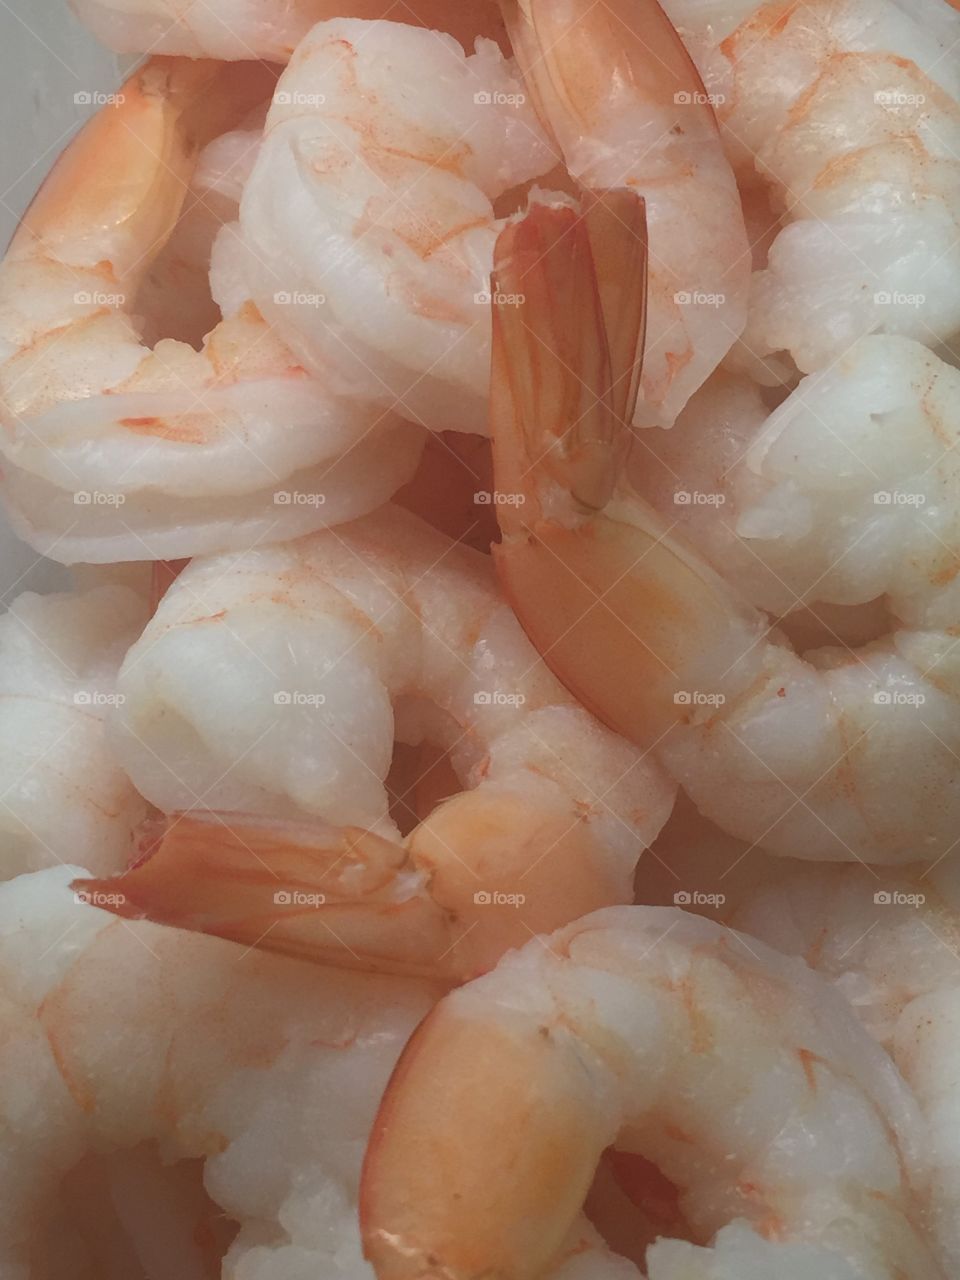 Cooked shrimp.